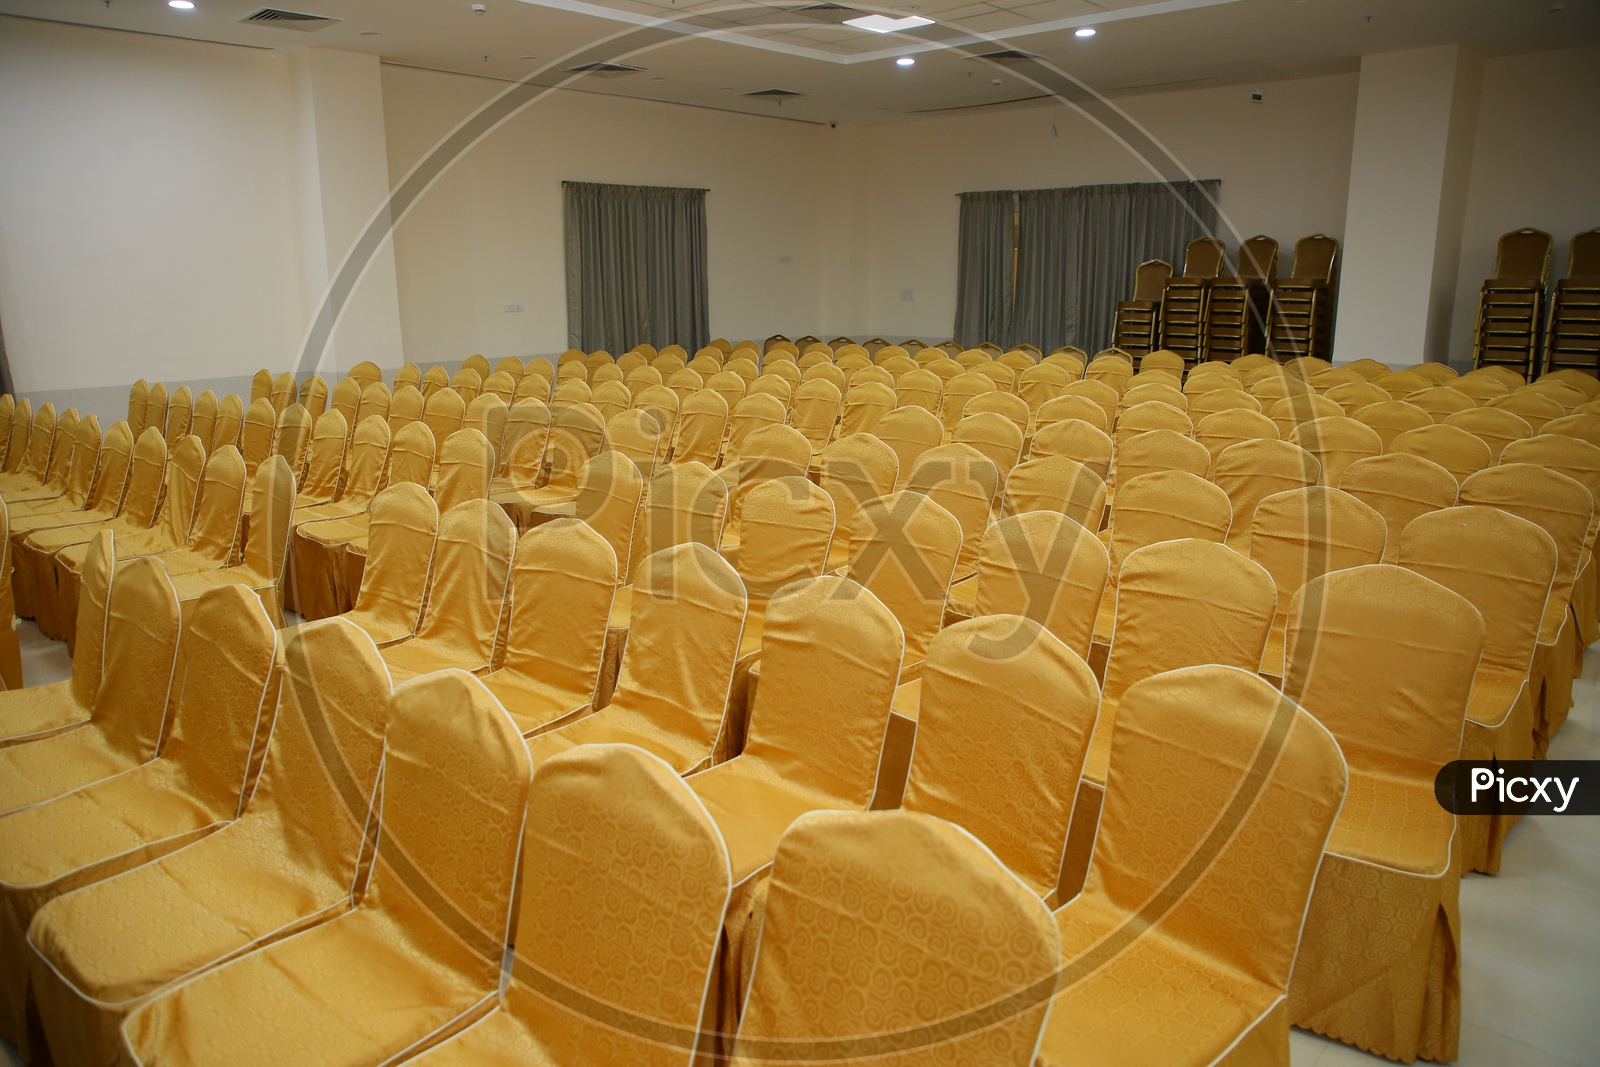 Chairs Arranged In a Convention Hall  For a Event Or Function